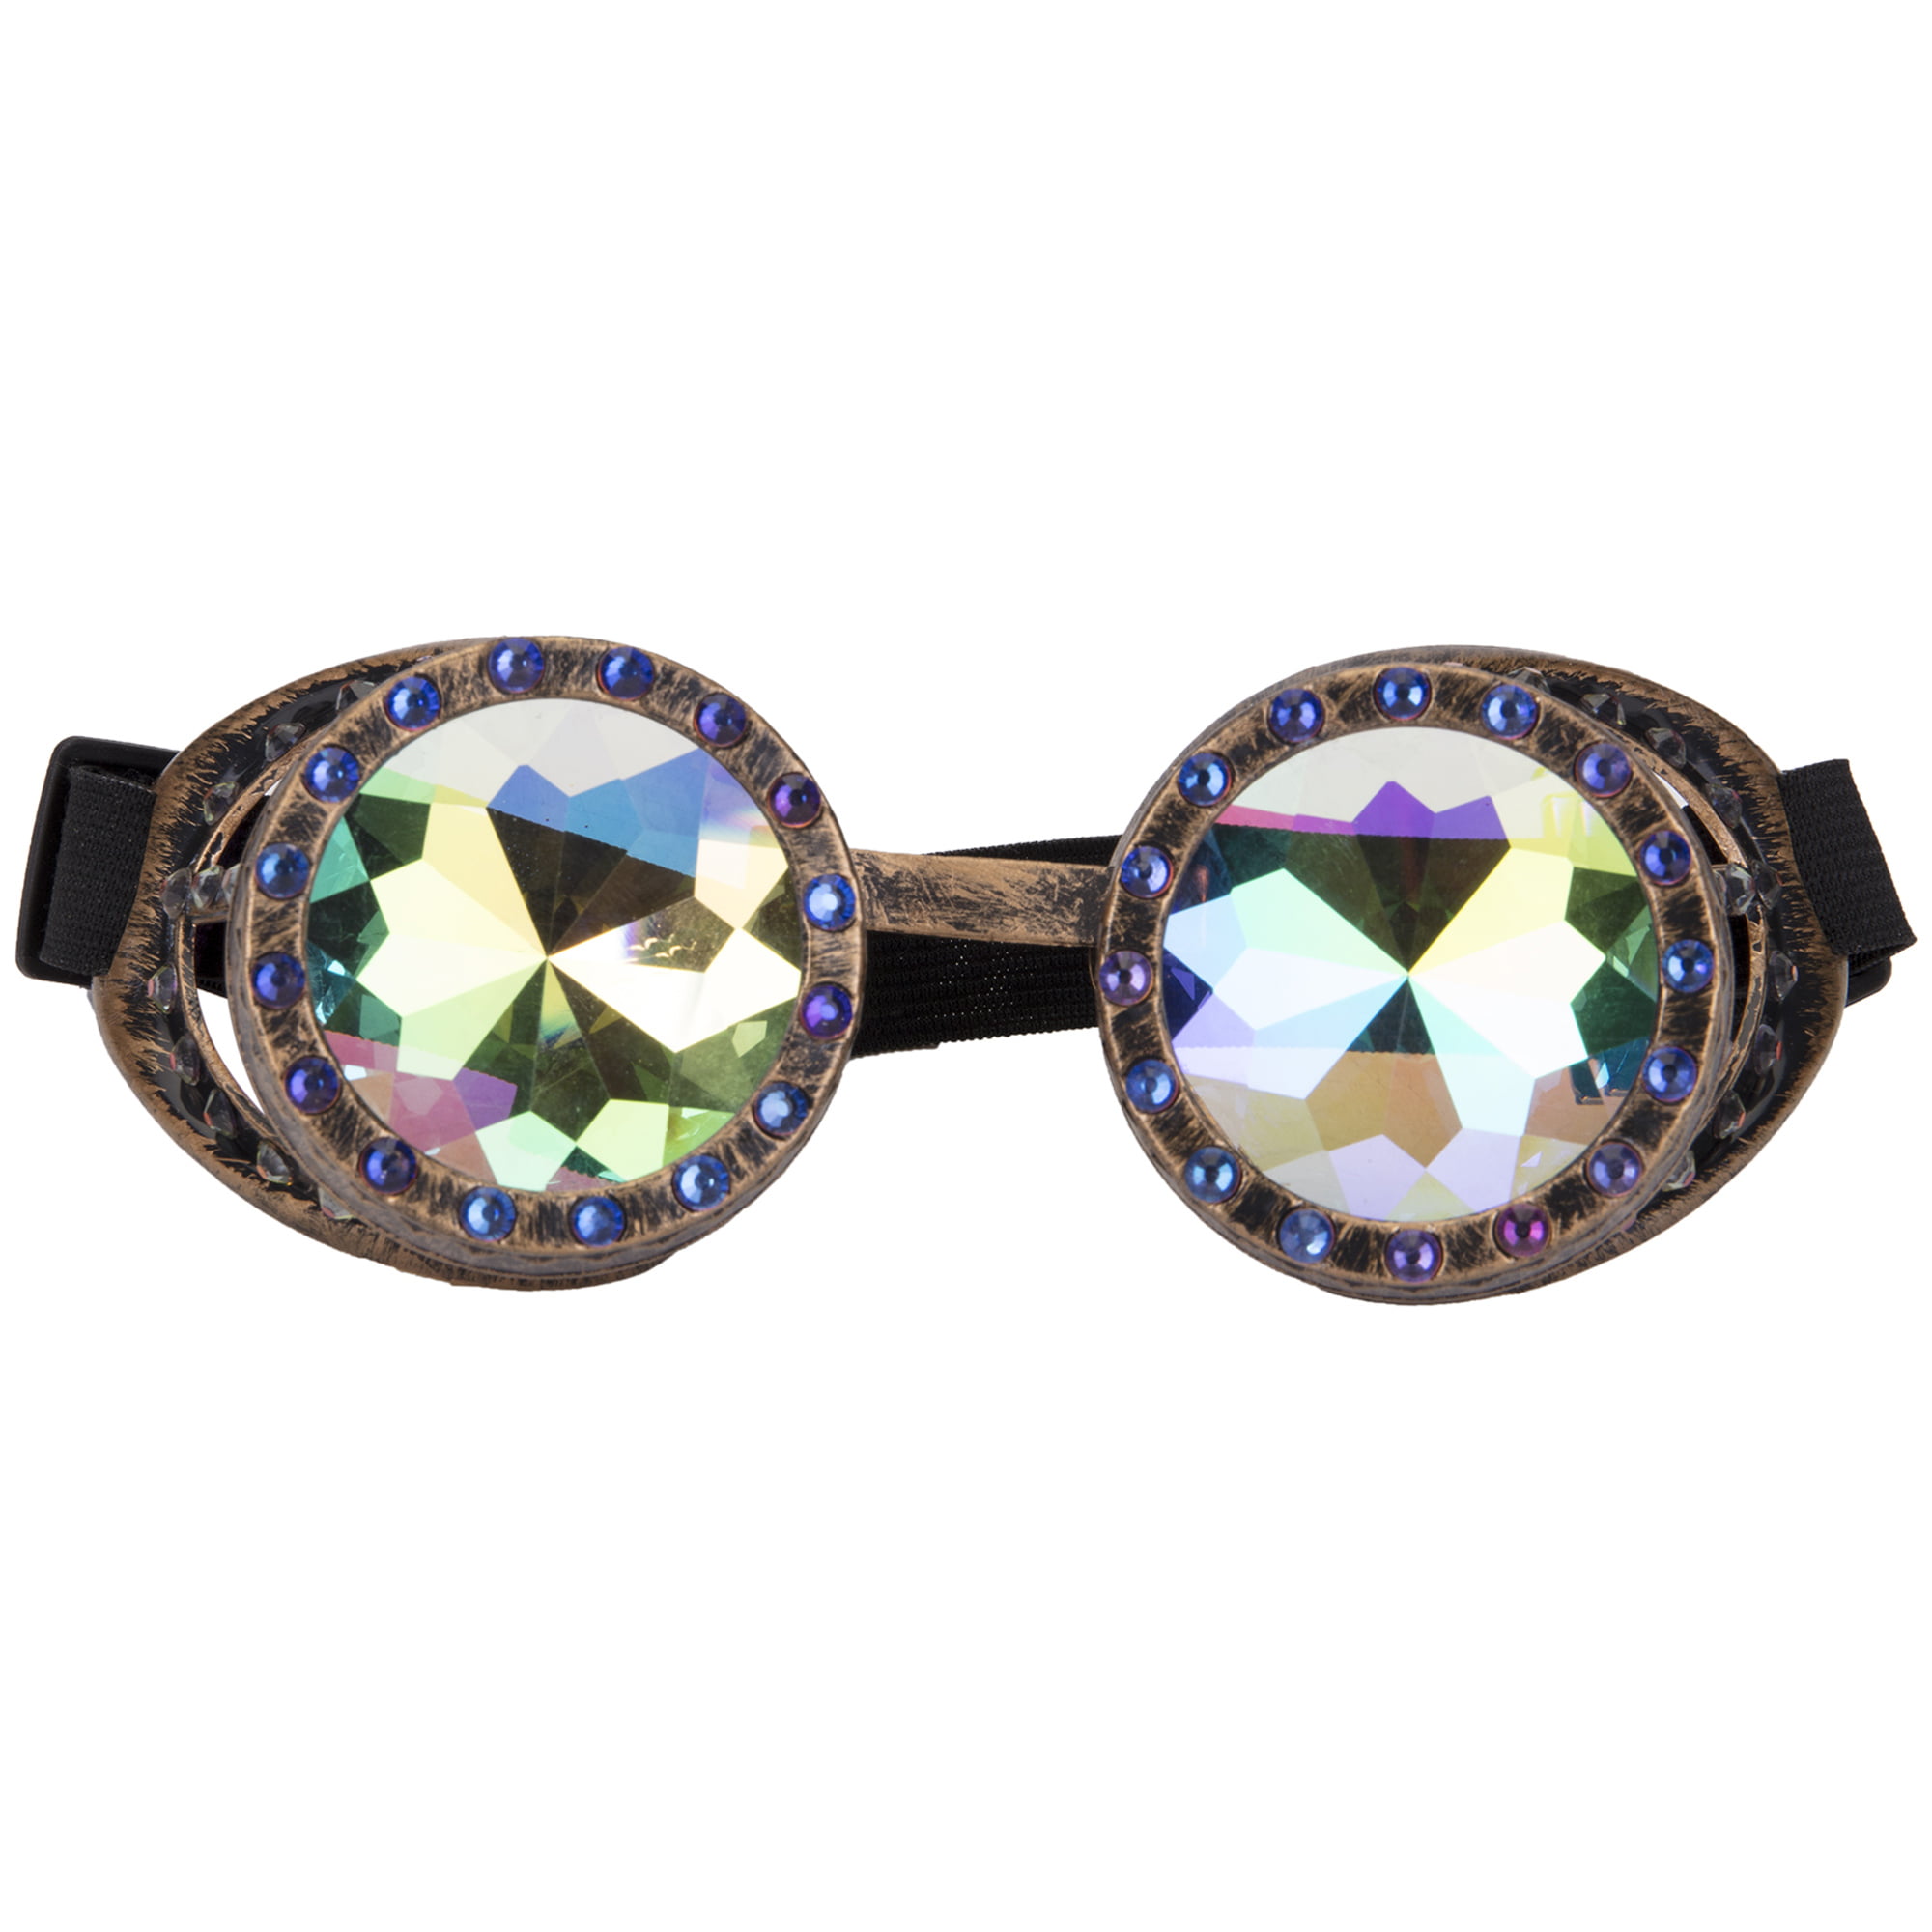 AFUT Kaleidoscope Goggles Cyber Real Crystal Prism Steampunk Rainbow Lenses for Halloween Goggles Shows 